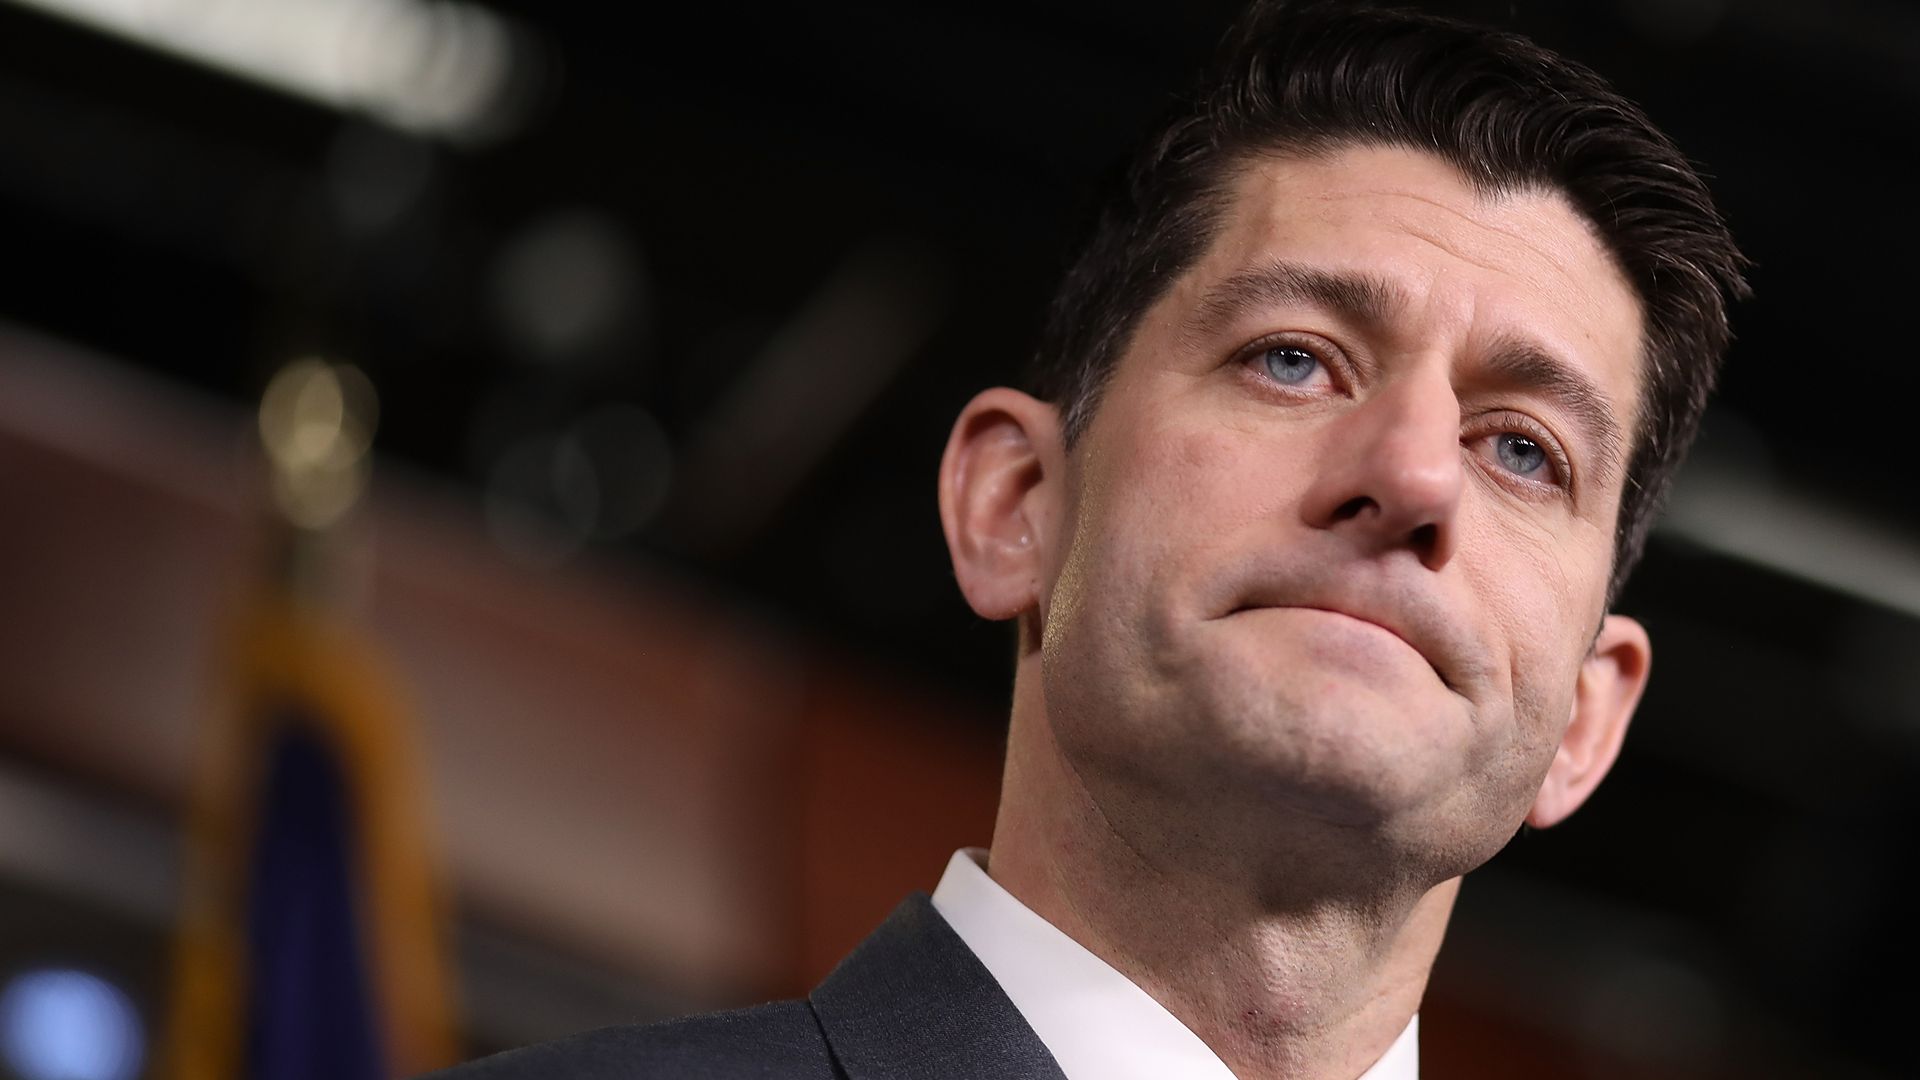 A closeup photo of Paul Ryan's face, in which he is almost frowning